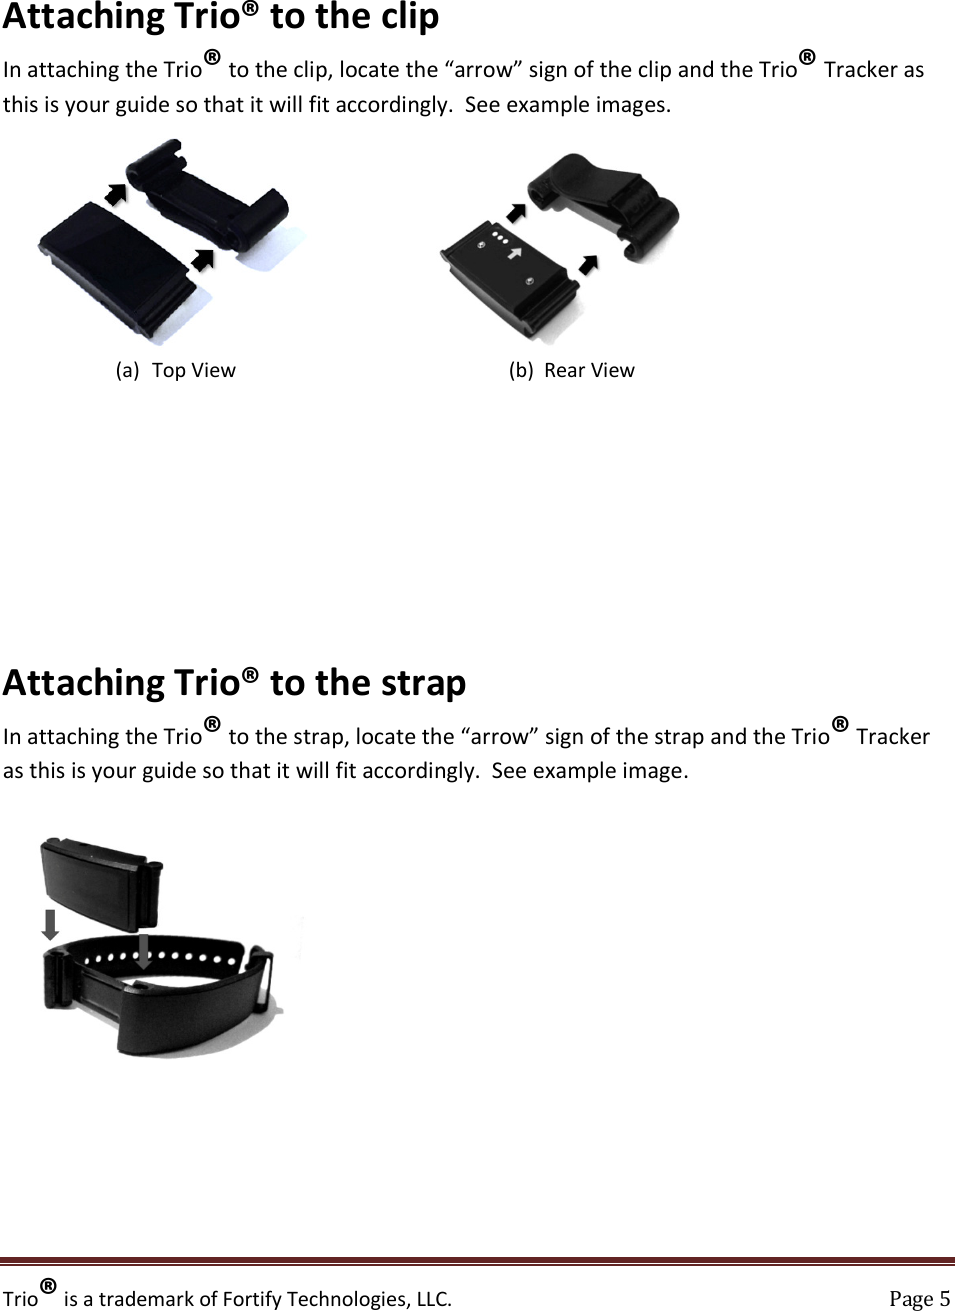 Trio® is a trademark of Fortify Technologies, LLC.    Page 5  Attaching Trio® to the clip In attaching the Trio® to the clip, locate the “arrow” sign of the clip and the Trio® Tracker as this is your guide so that it will fit accordingly.  See example images.                (a) Top View                                                      (b)  Rear View           Attaching Trio® to the strap In attaching the Trio® to the strap, locate the “arrow” sign of the strap and the Trio® Tracker as this is your guide so that it will fit accordingly.  See example image.           